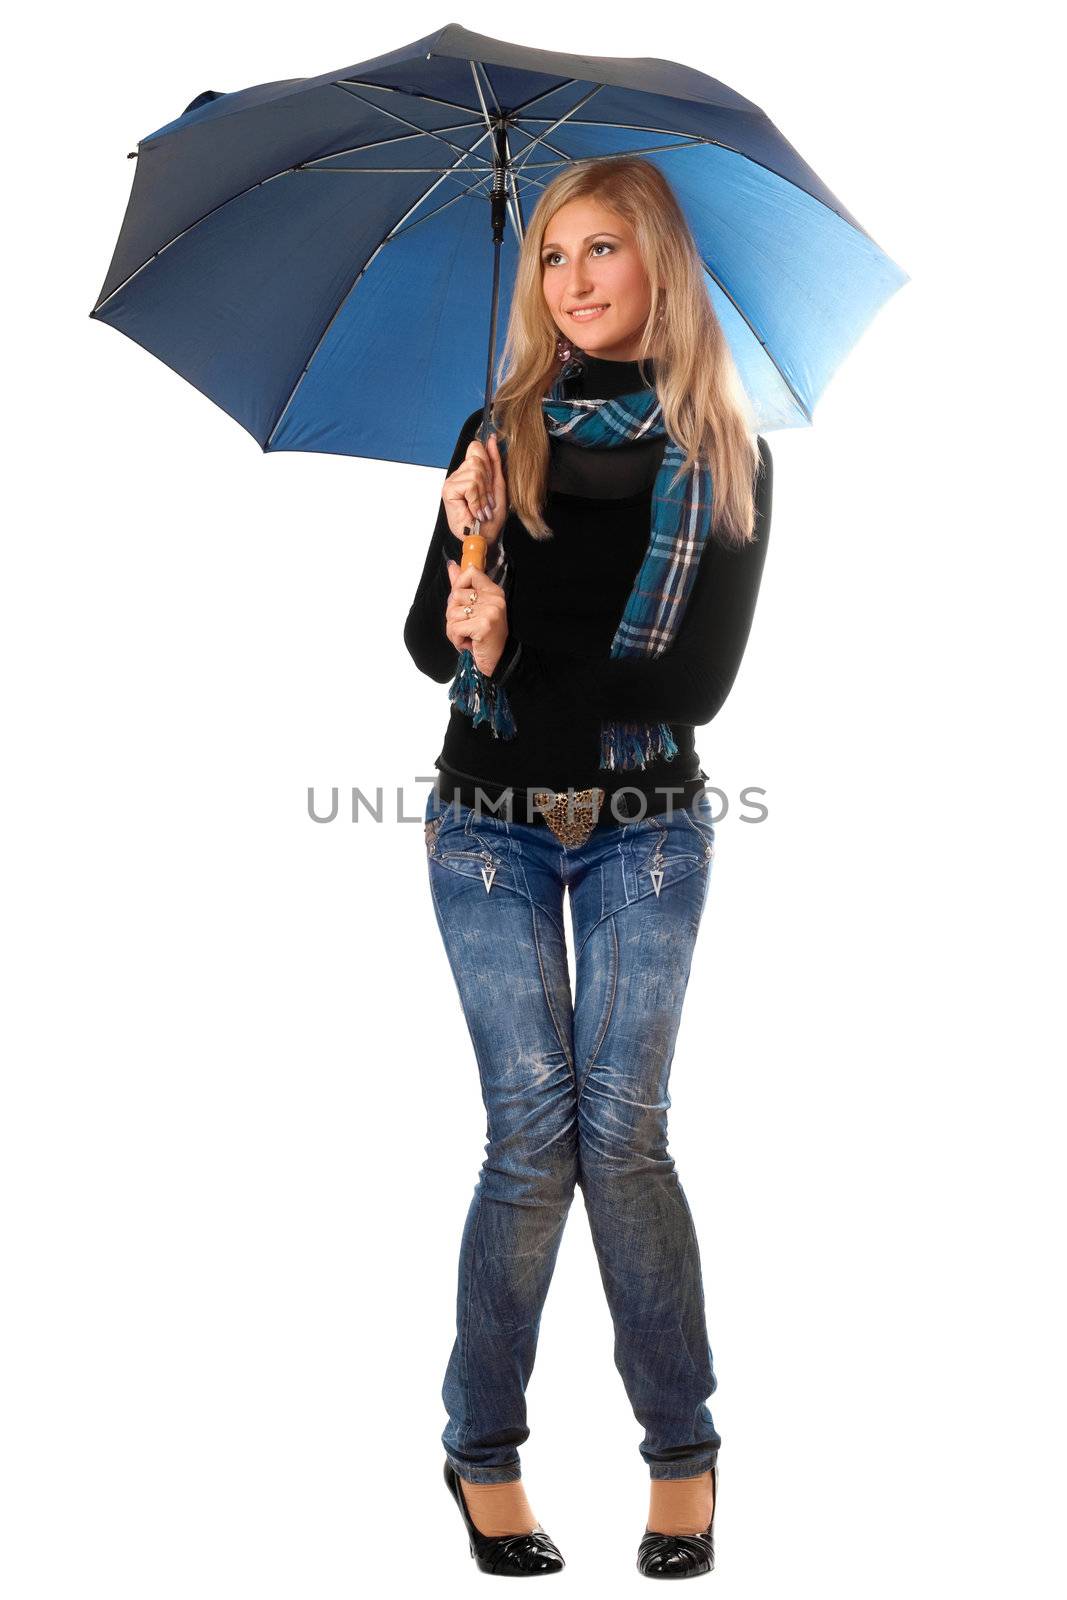 Beautiful smiling blonde with blue umbrella. Isolated